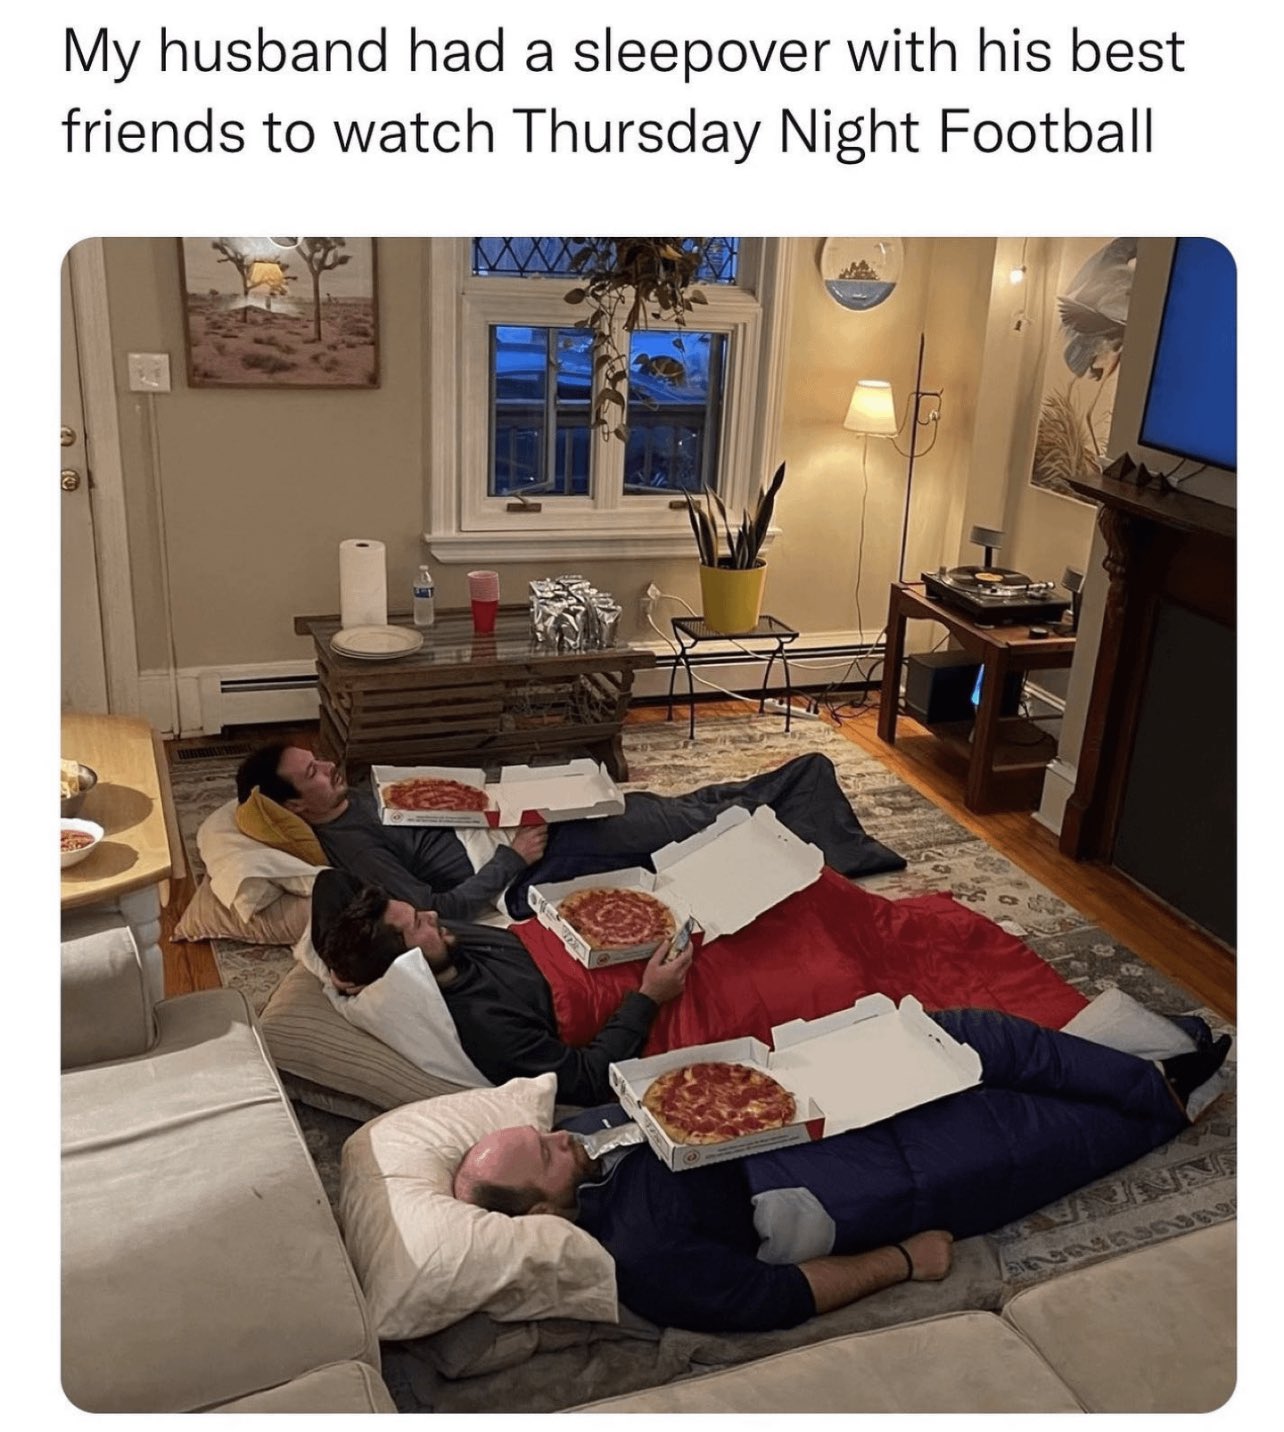 internet hall of  fame - my husband had a sleepover with his friends - My husband had a sleepover with his best friends to watch Thursday Night Football